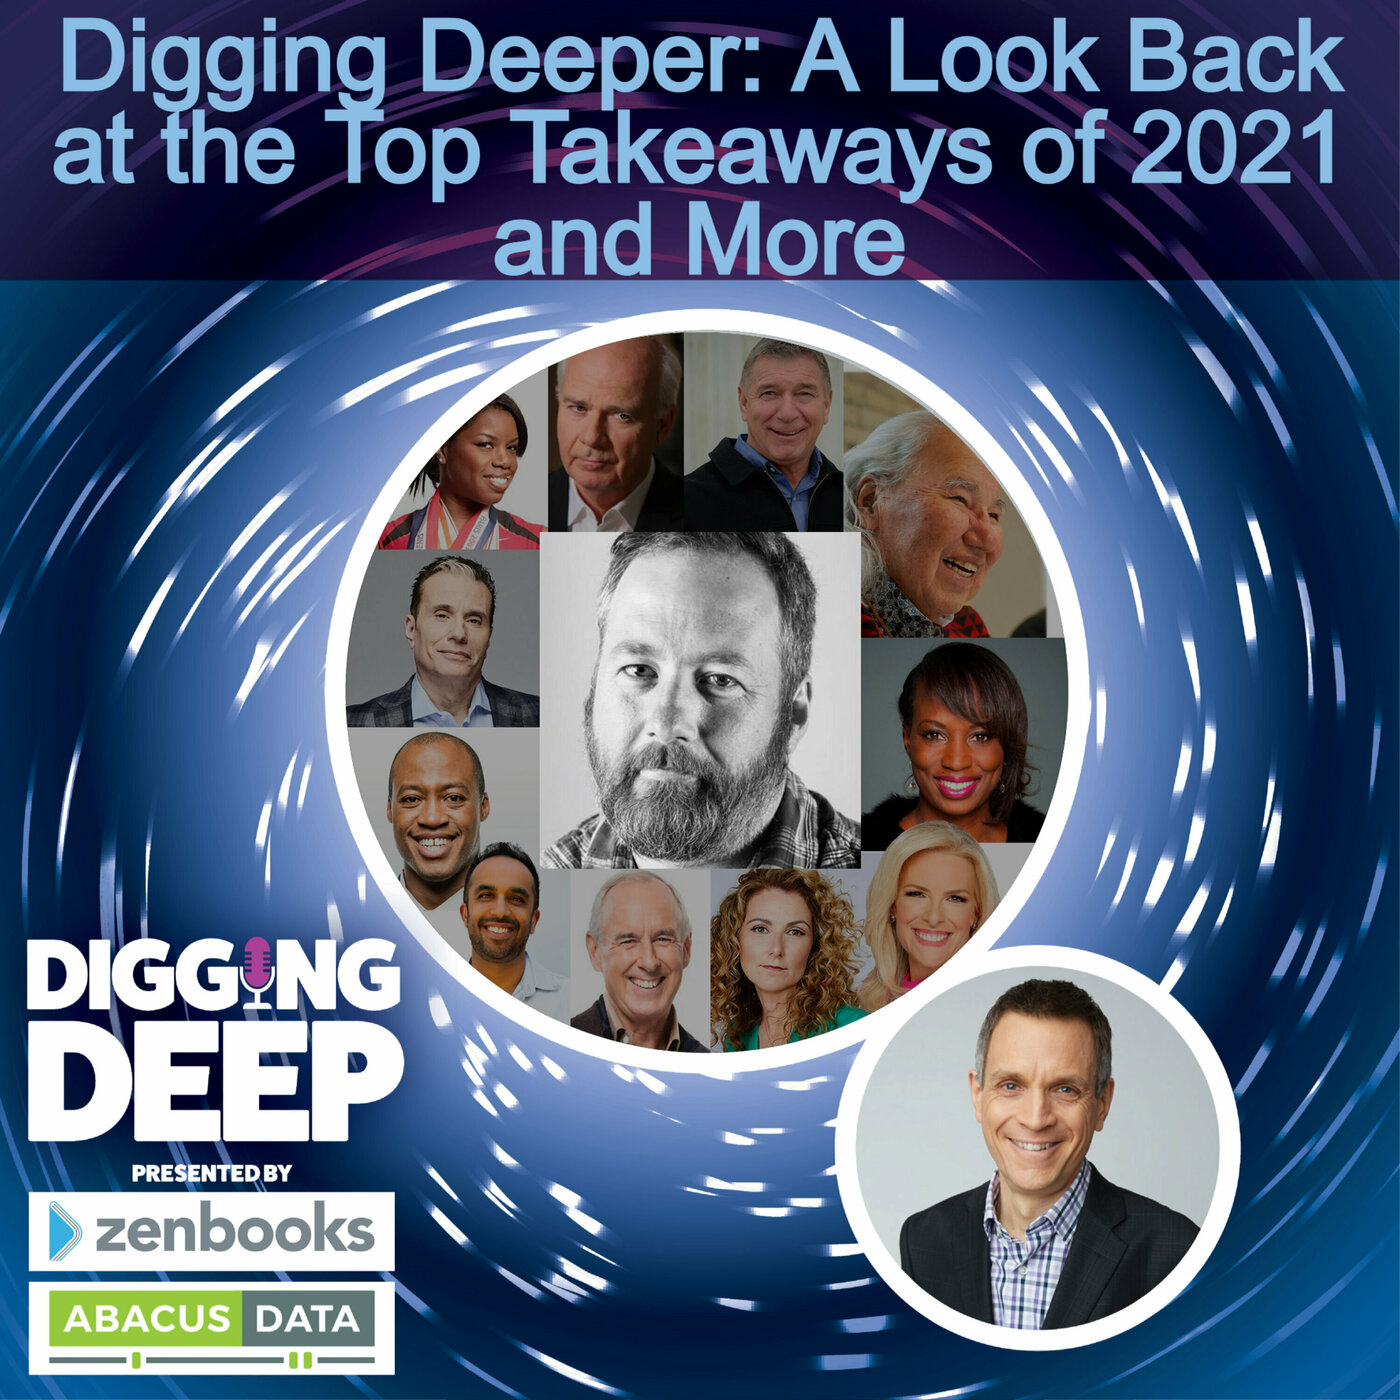 Digging Deeper : A Look Back at the Top Takeaways